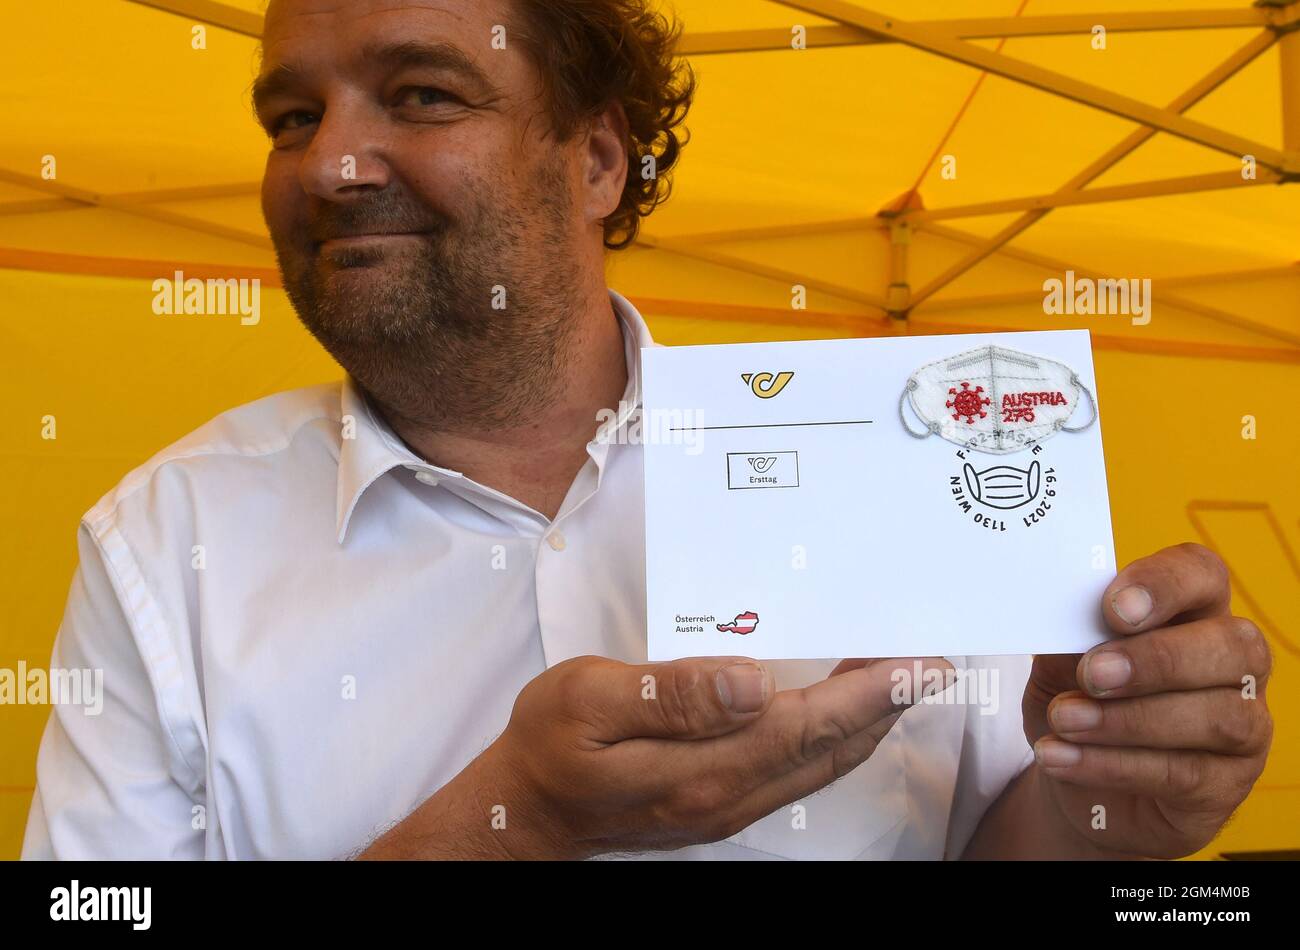 Vienna, Austria. 16th Sep, 2021. A staff member of the Austrian Post shows an envelope with a Mini FFP2 mask special stamp in Vienna, Austria, on Sept. 16, 2021. The Austrian Post issued a Mini FFP2 mask special stamp on Thursday, aimed at reminding people about using FFP2 masks to help protect against infection. Credit: Guo Chen/Xinhua/Alamy Live News Stock Photo